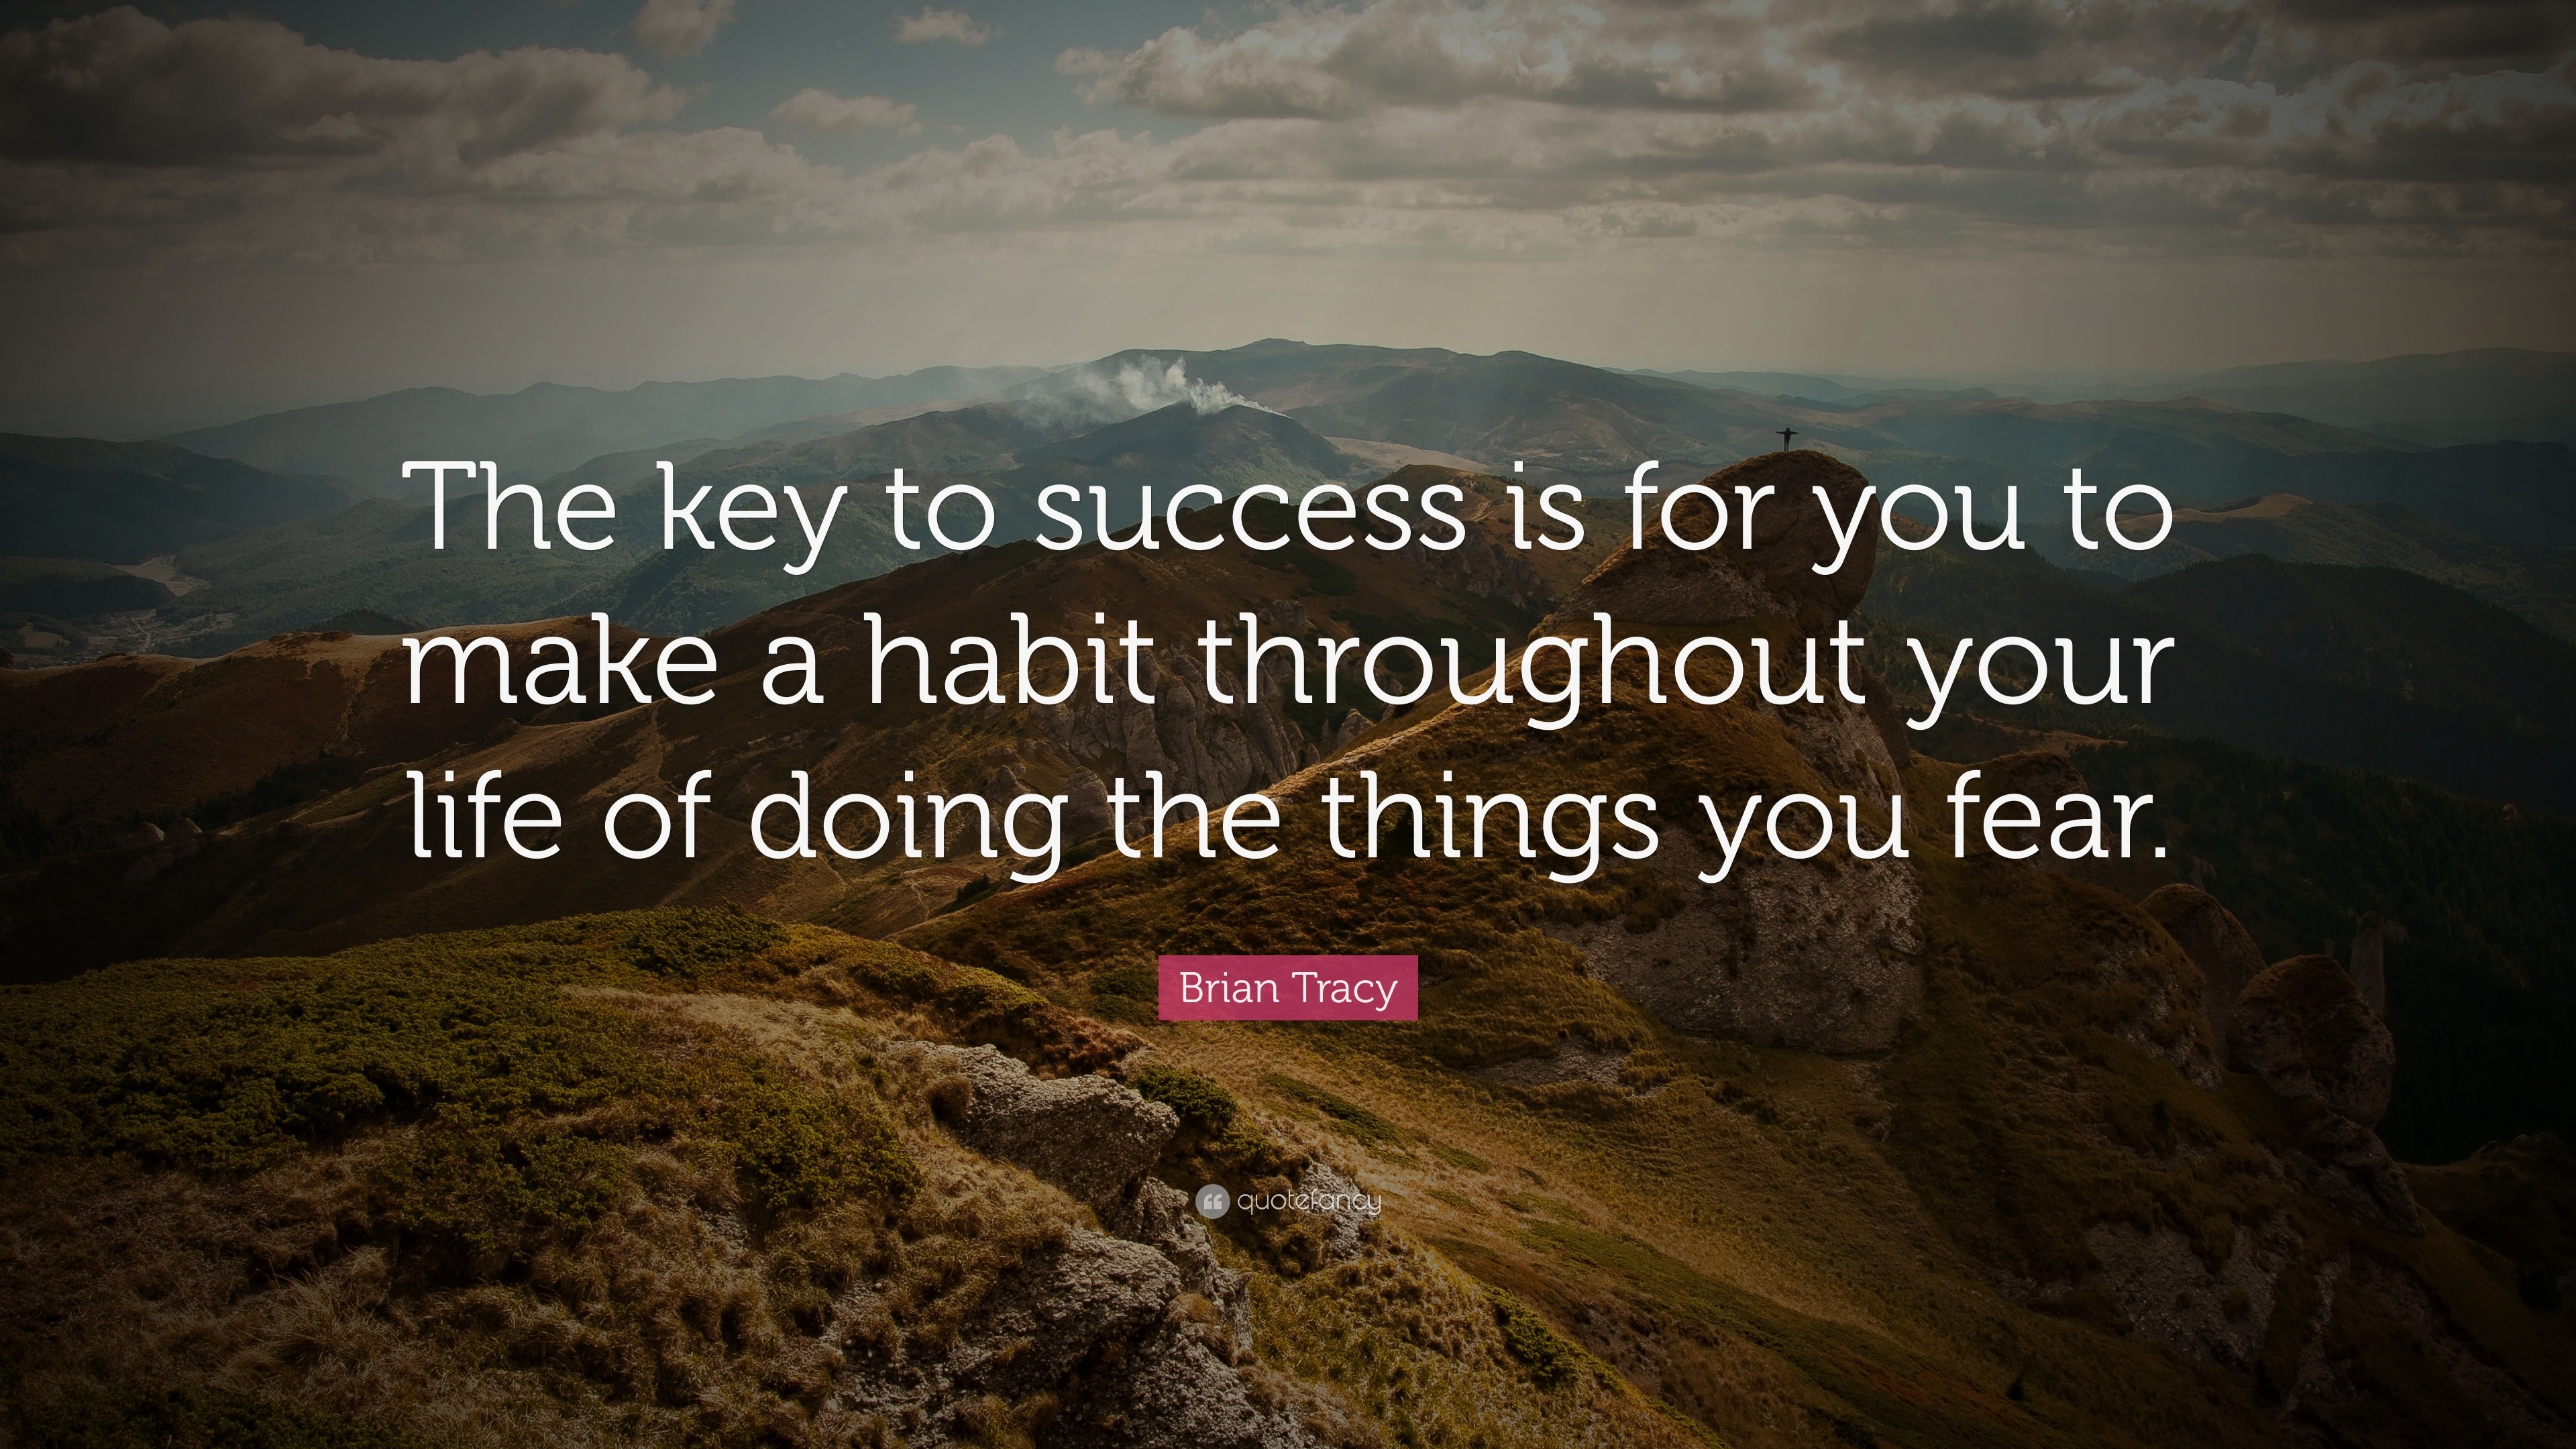 Brian Tracy Quote: “The key to success is for you to make a habit  throughout your